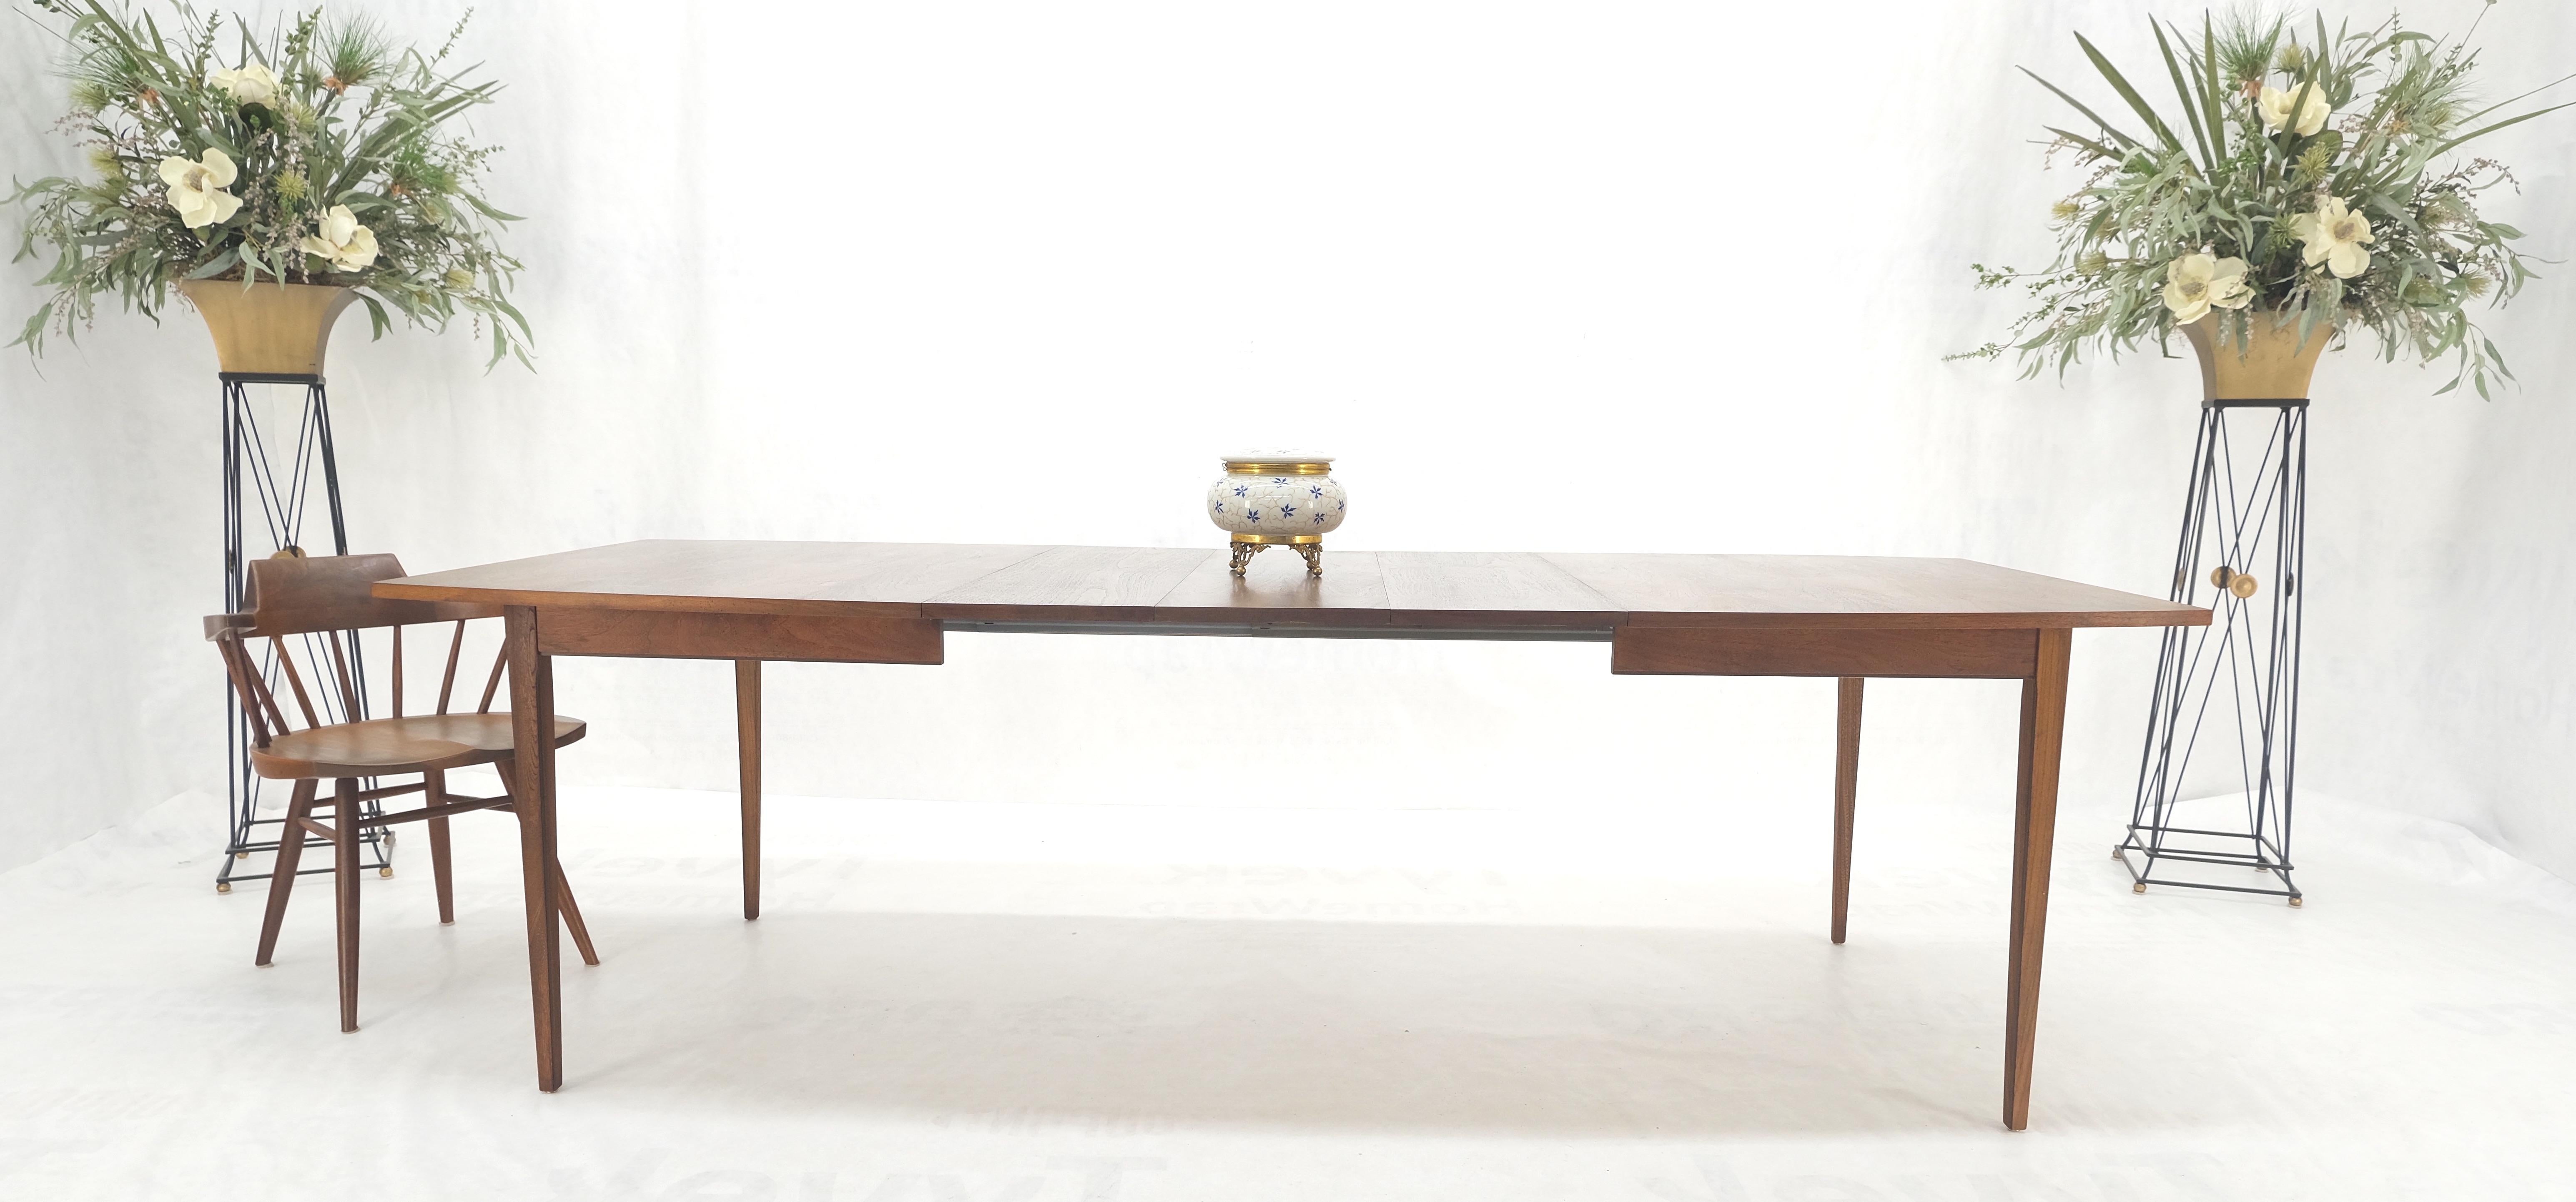 Danish Mid Century Modern Walnut Butterfly Accents Boat Shape Dining Table MINT! For Sale 6